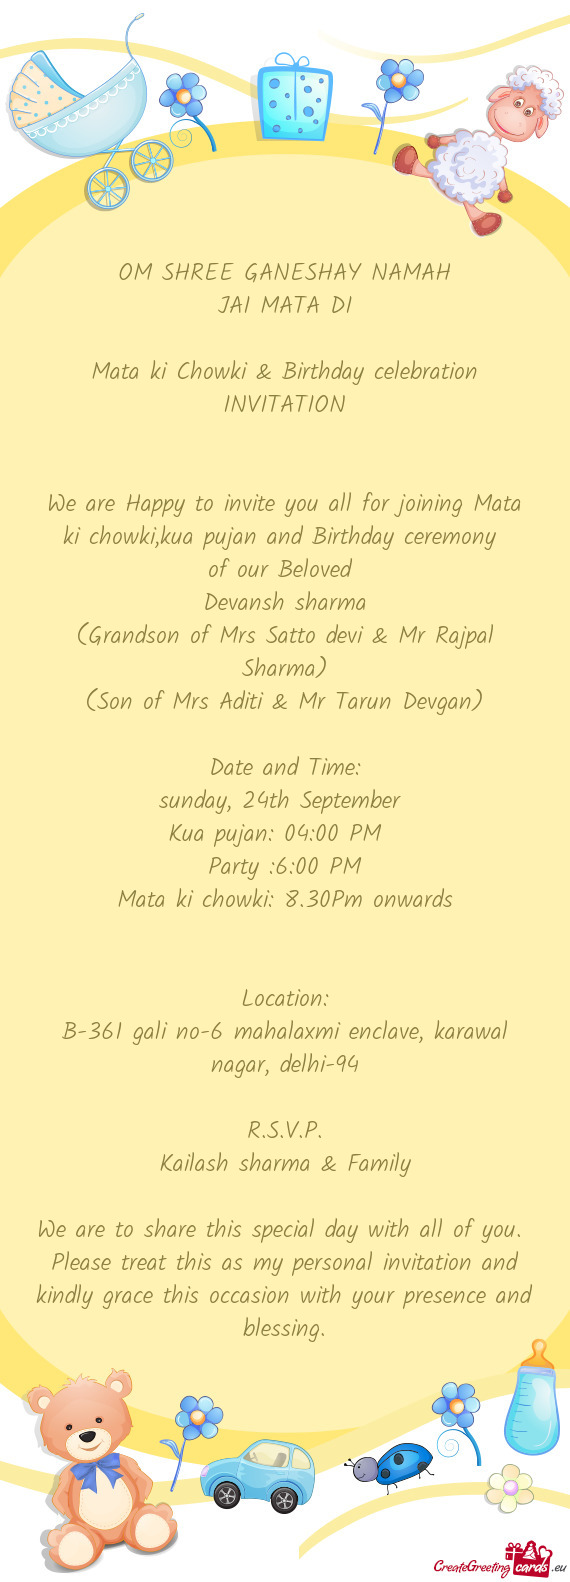 We are Happy to invite you all for joining Mata ki chowki,kua pujan and Birthday ceremony